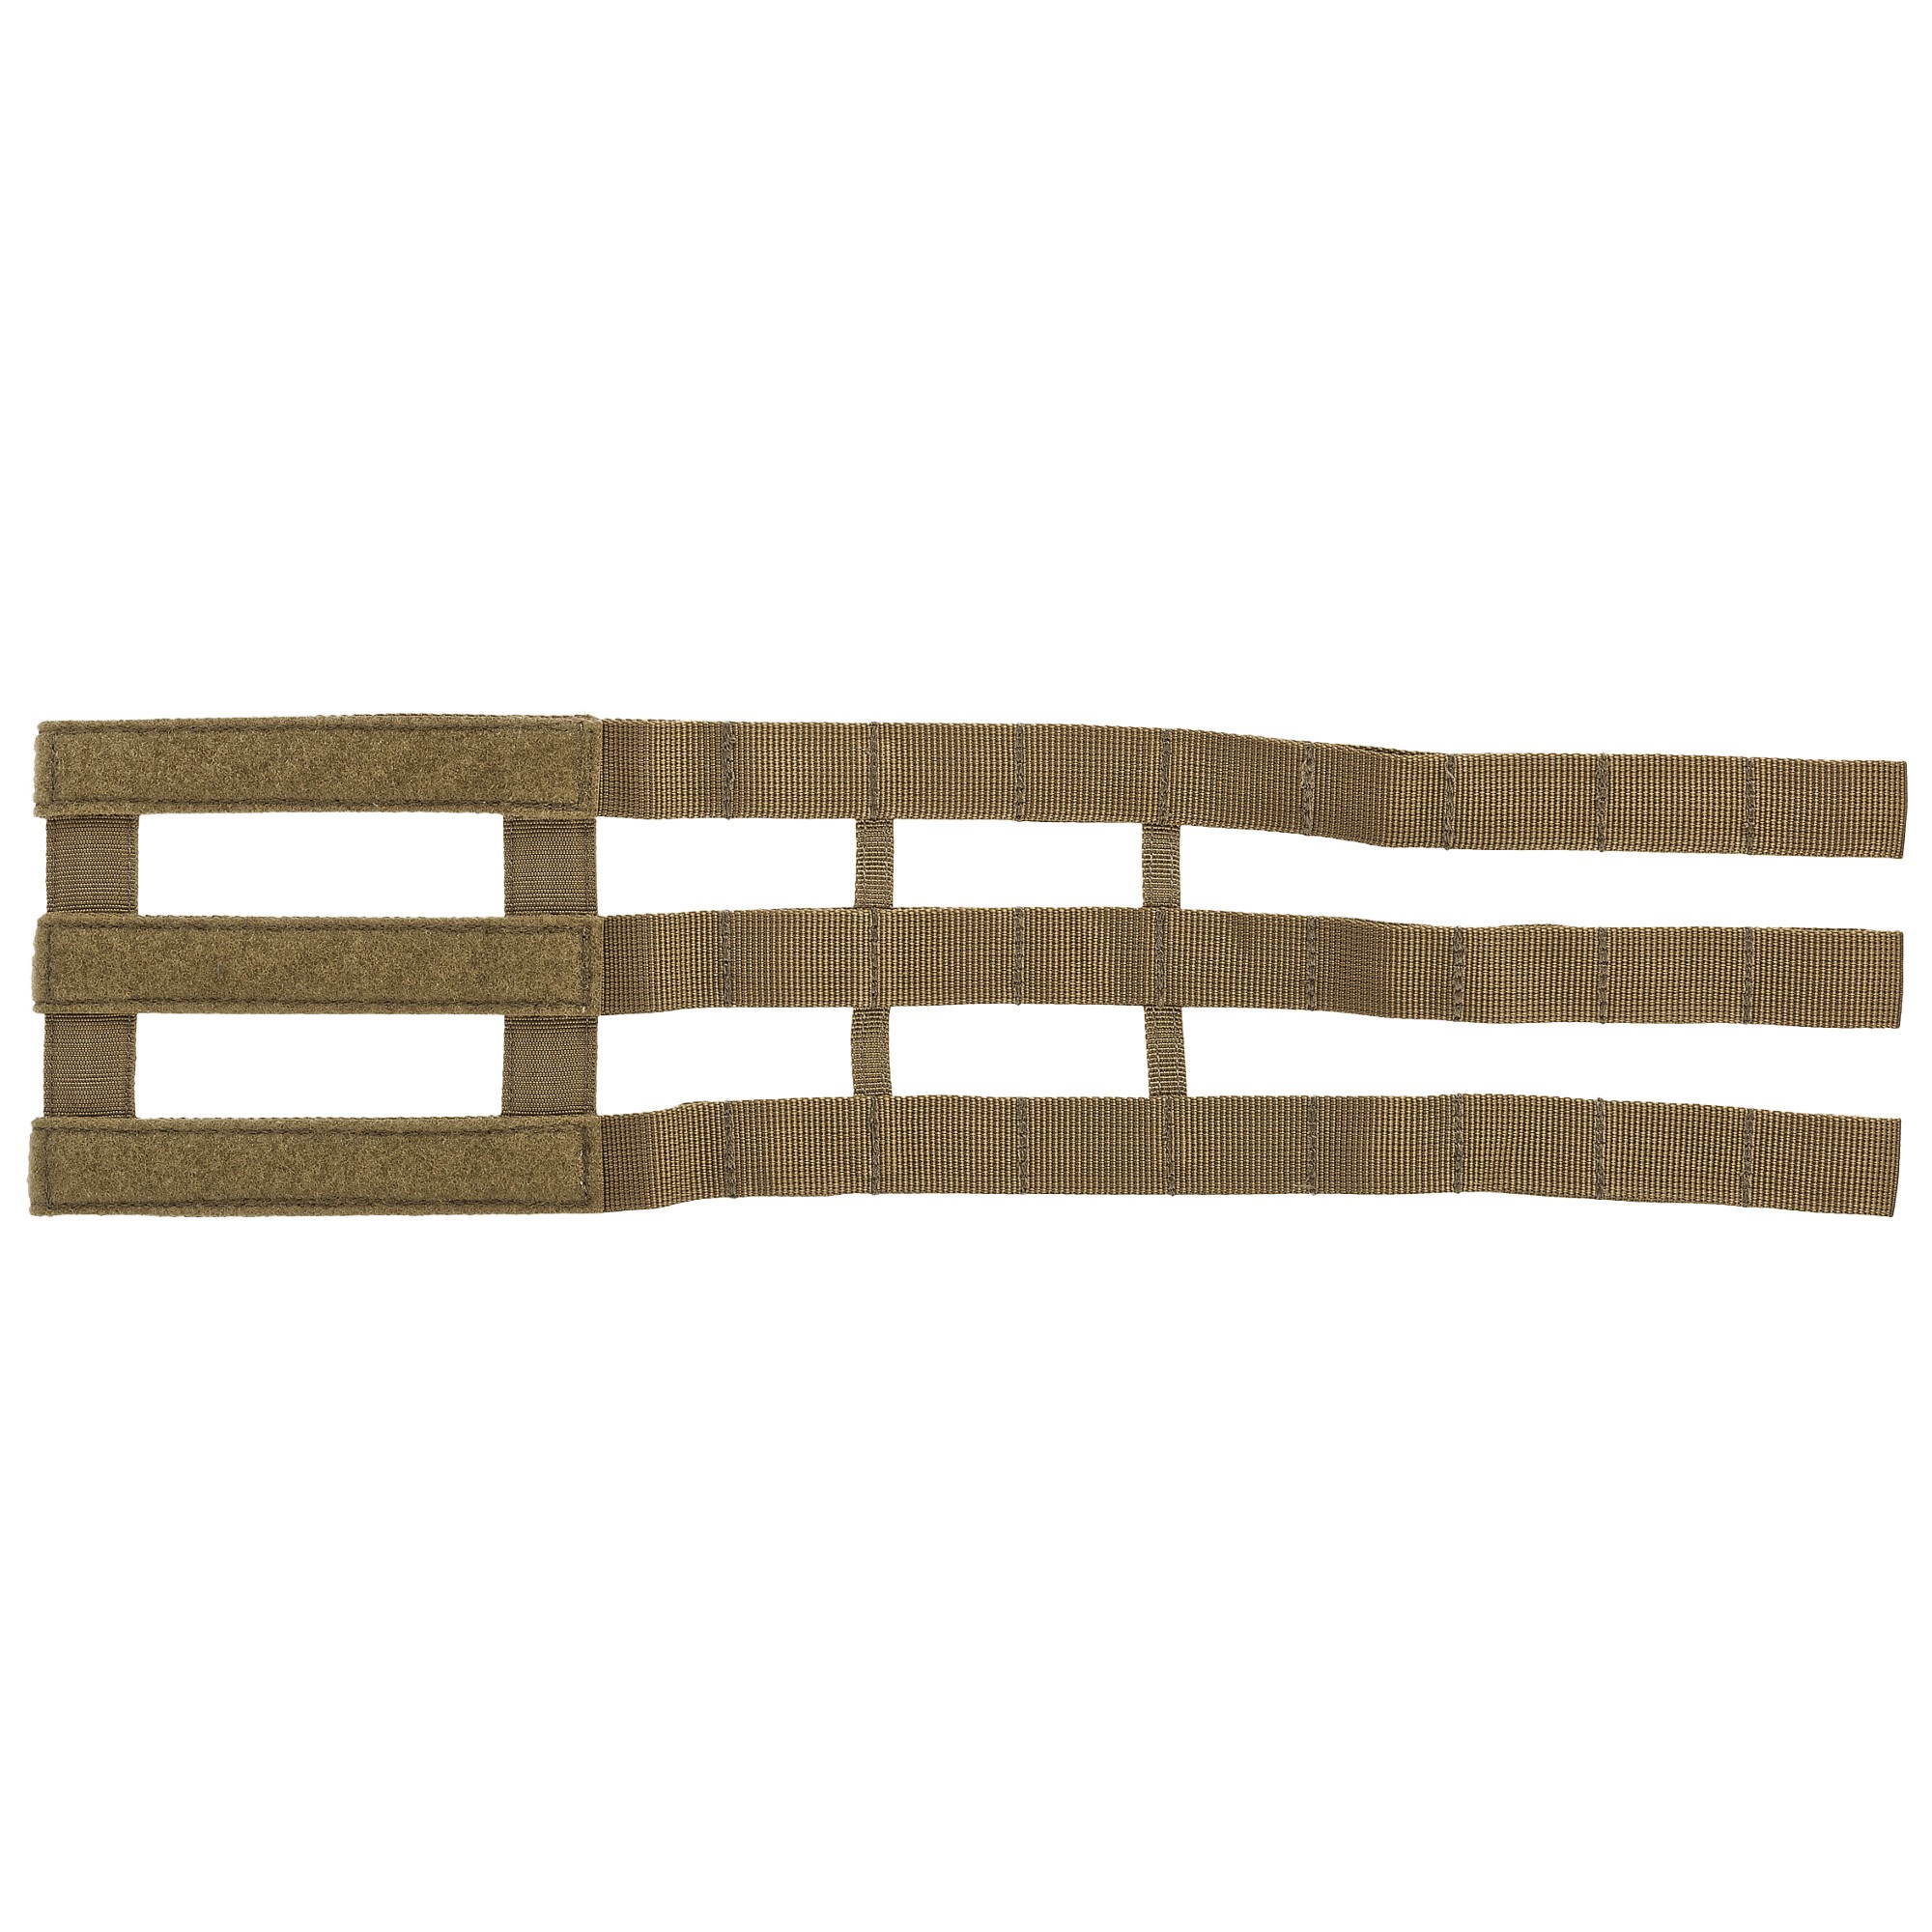 5.11 TacTec Plate Carrier Side Panels